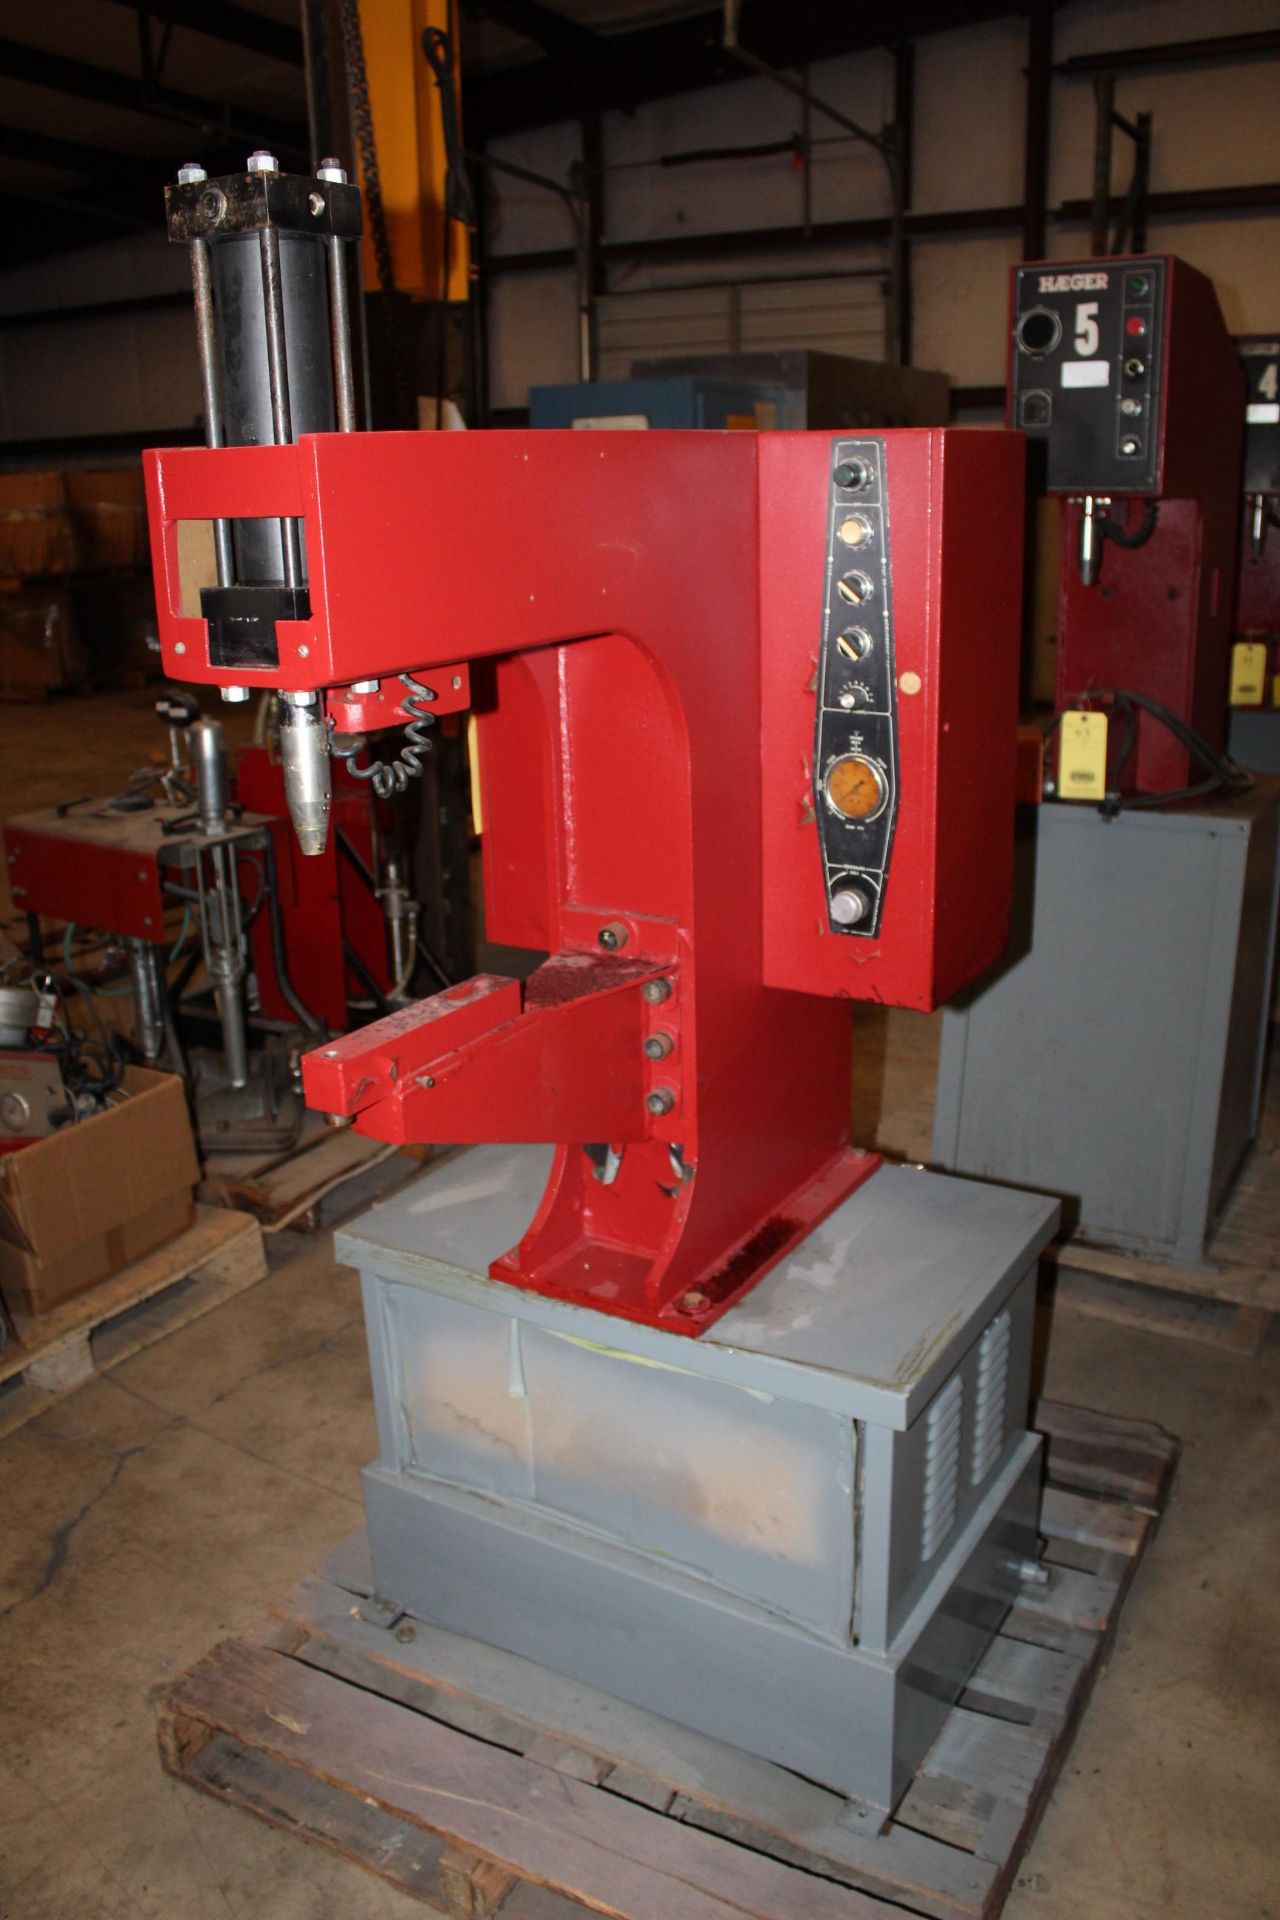 INSERTION PRESS, 6 T. cap. (Located at: Accurate, Inc., 1200 East 4th Street, Taylor, TX 76574)